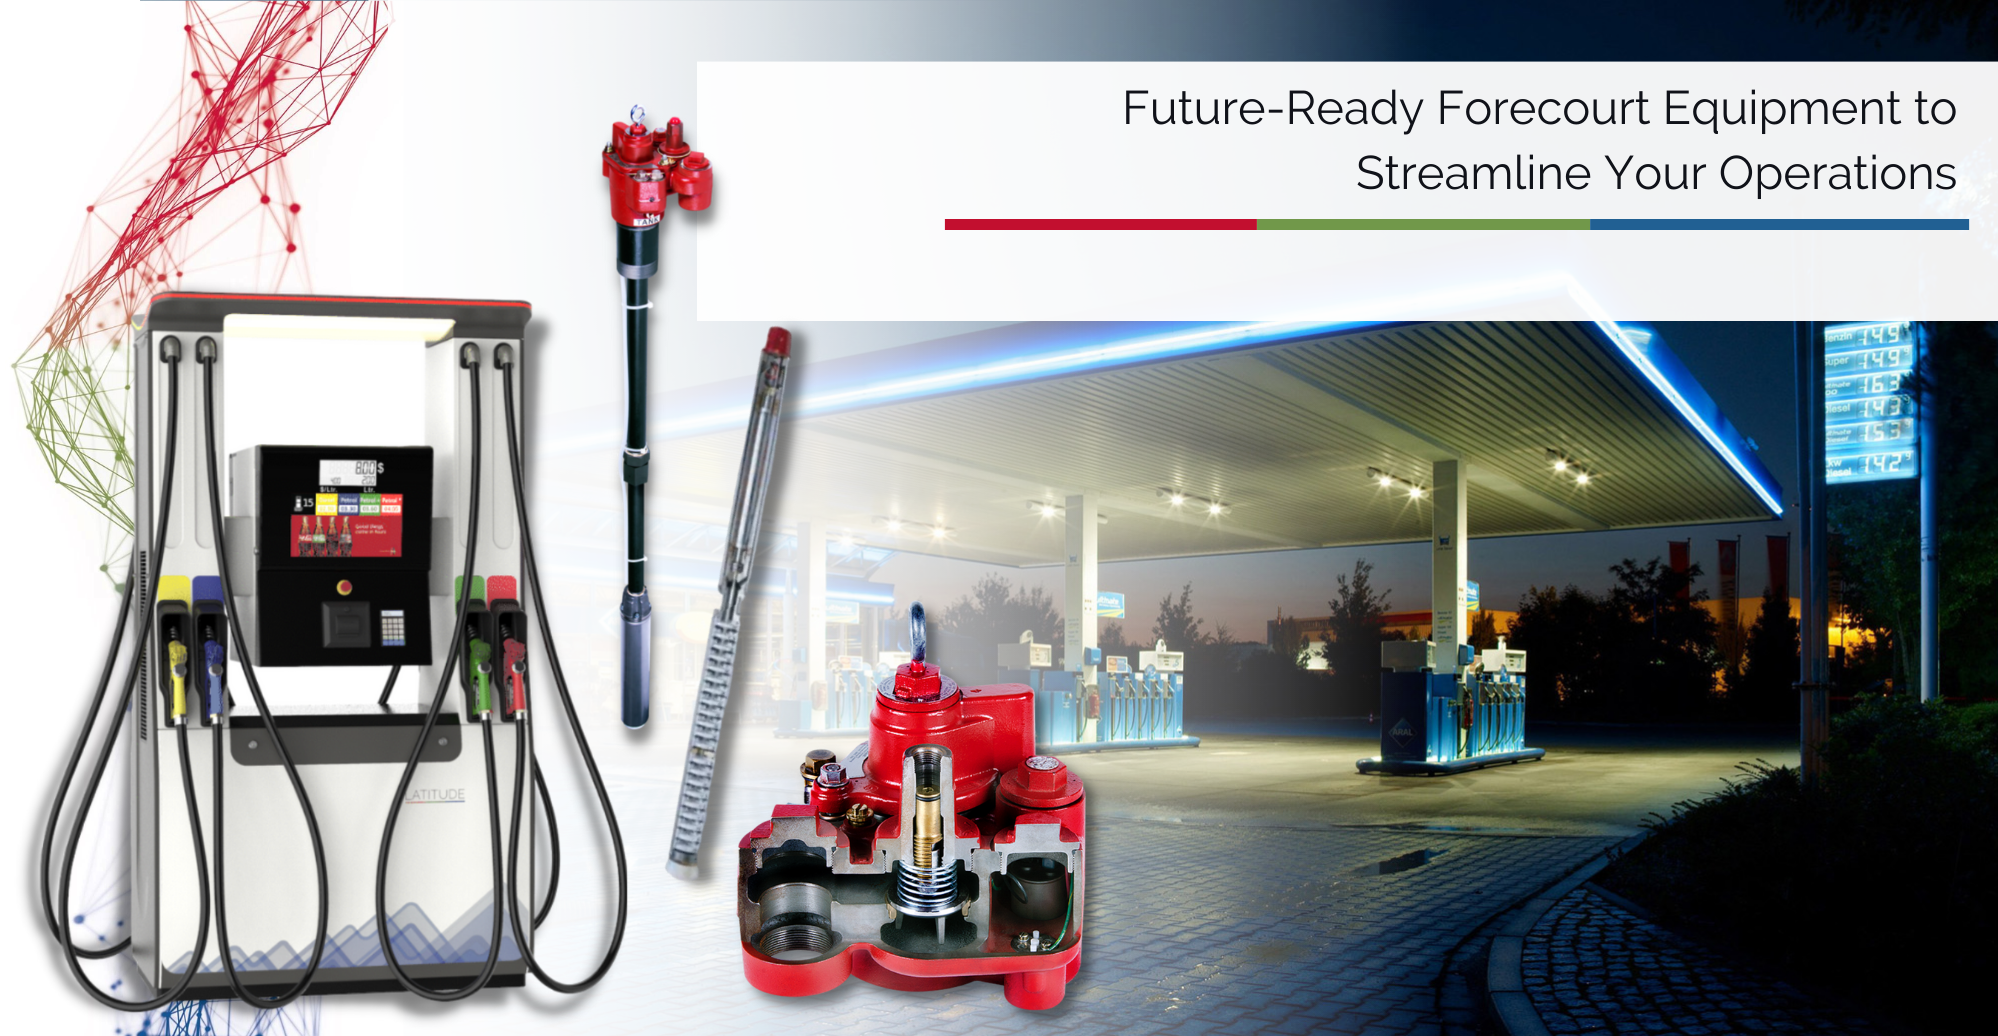  Future-ready fuel dispenser and submersible turbine pumps forecourt equipment